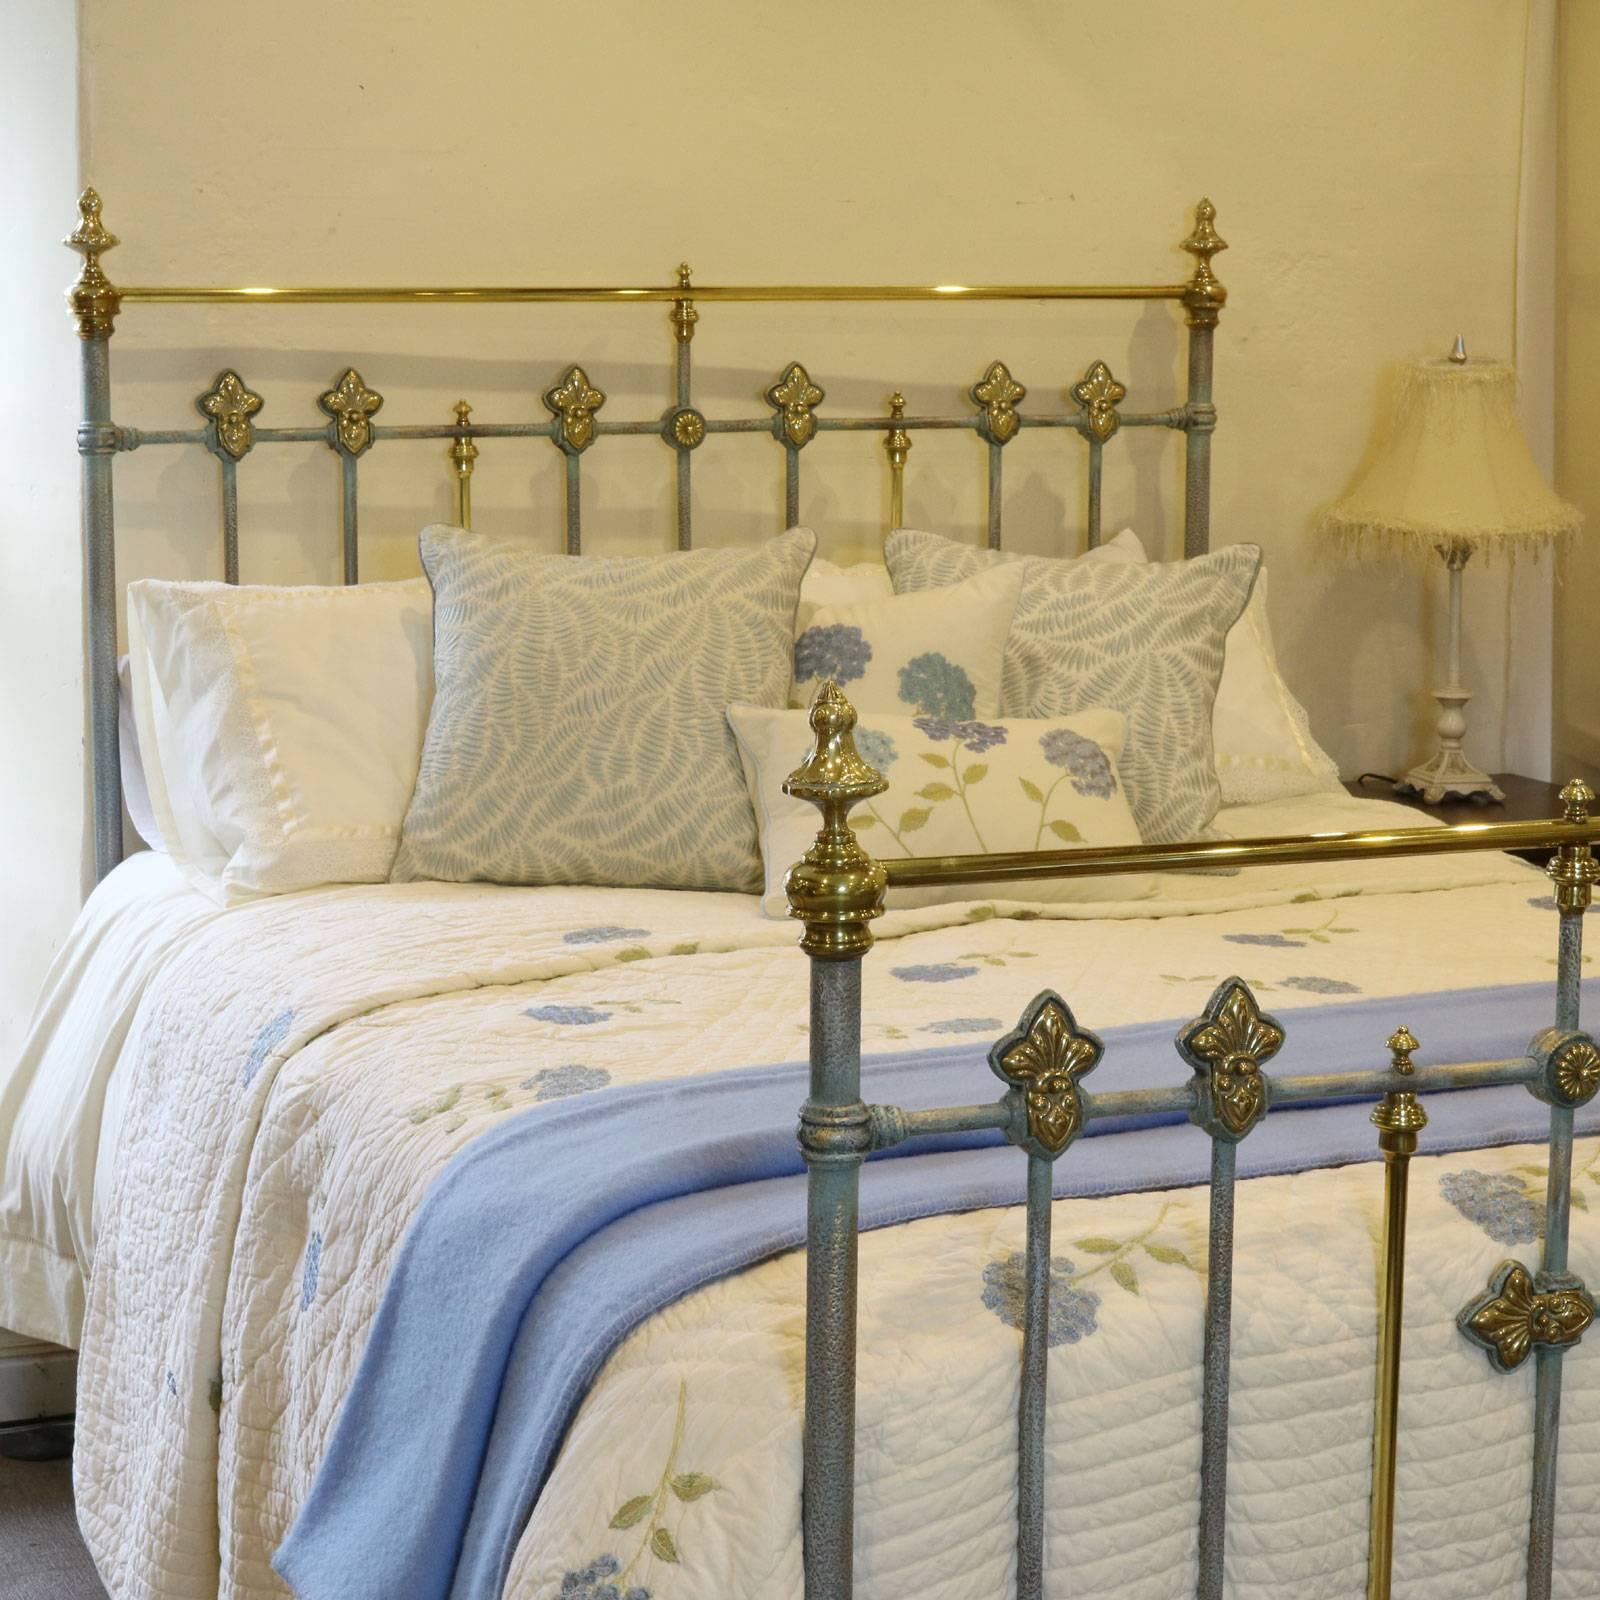 This superb bed has ornate brass decoration including brass rosettes and central barley twist brass ring, 5ft wide.

The ironwork has been finished in our hand paint finish of blue verdigris, a textured and layered effect with tones of blues,